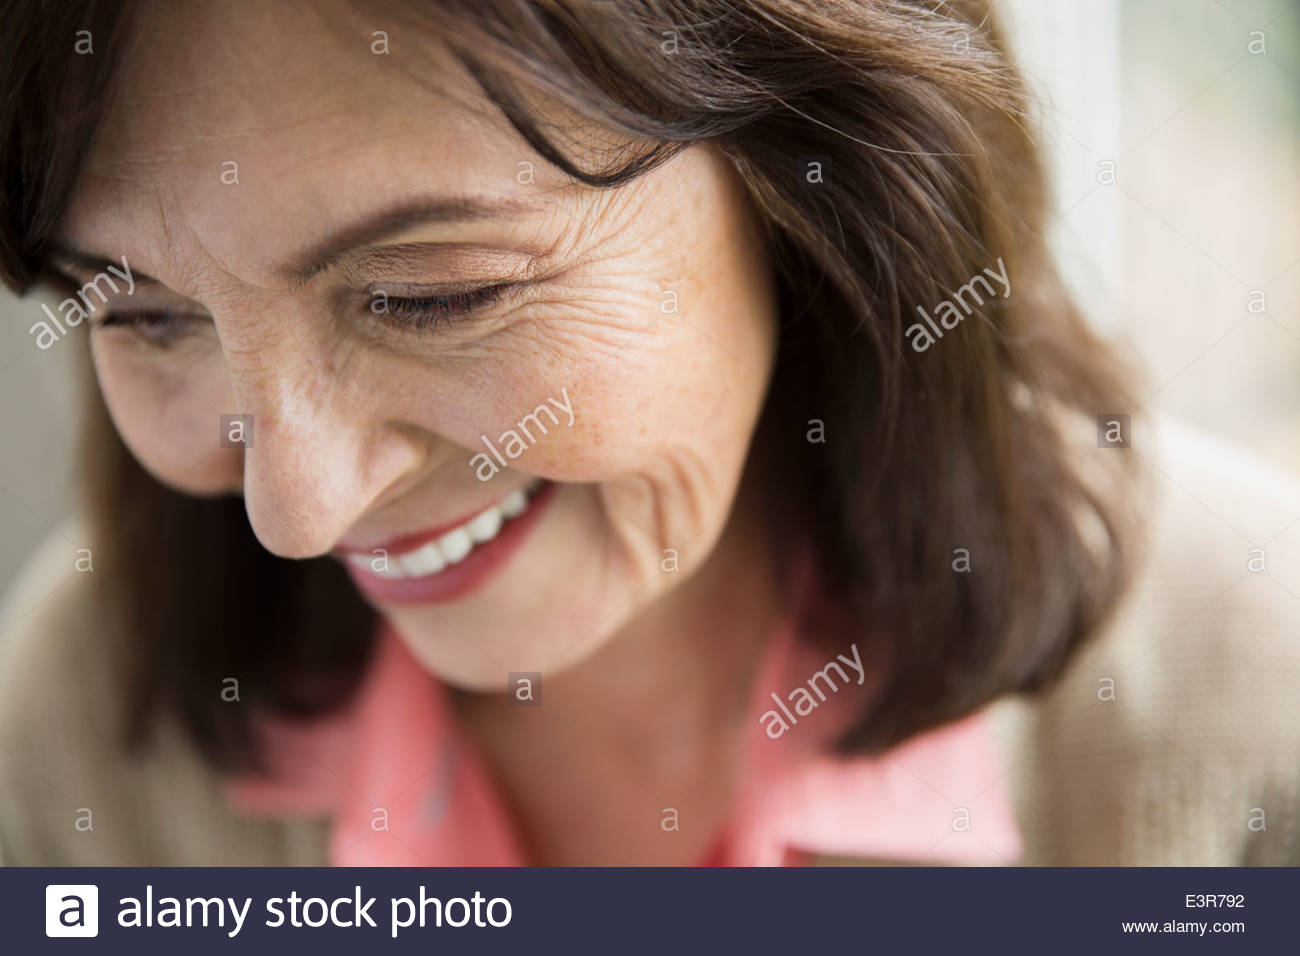 Close up of smiling woman looking down Stock Photo